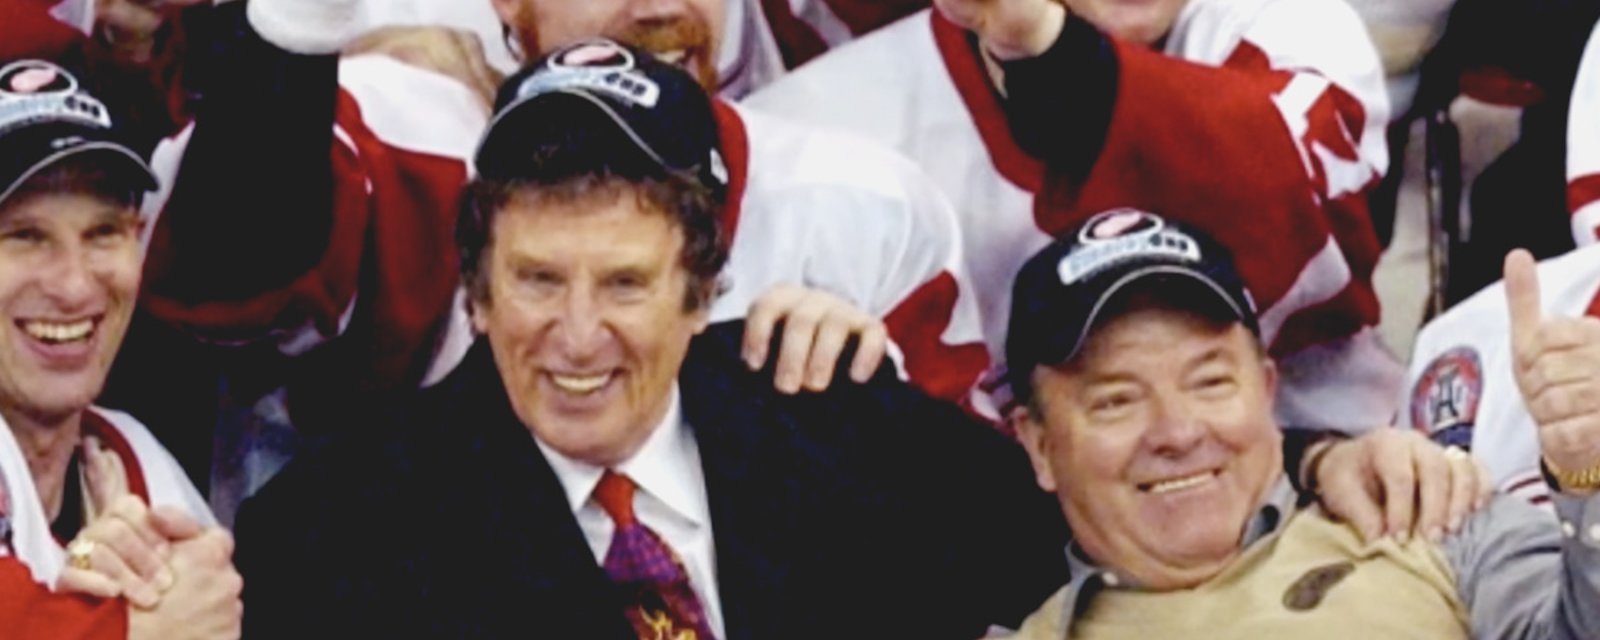 Must Read : The best tributes regarding the passing of Mike Ilitch.